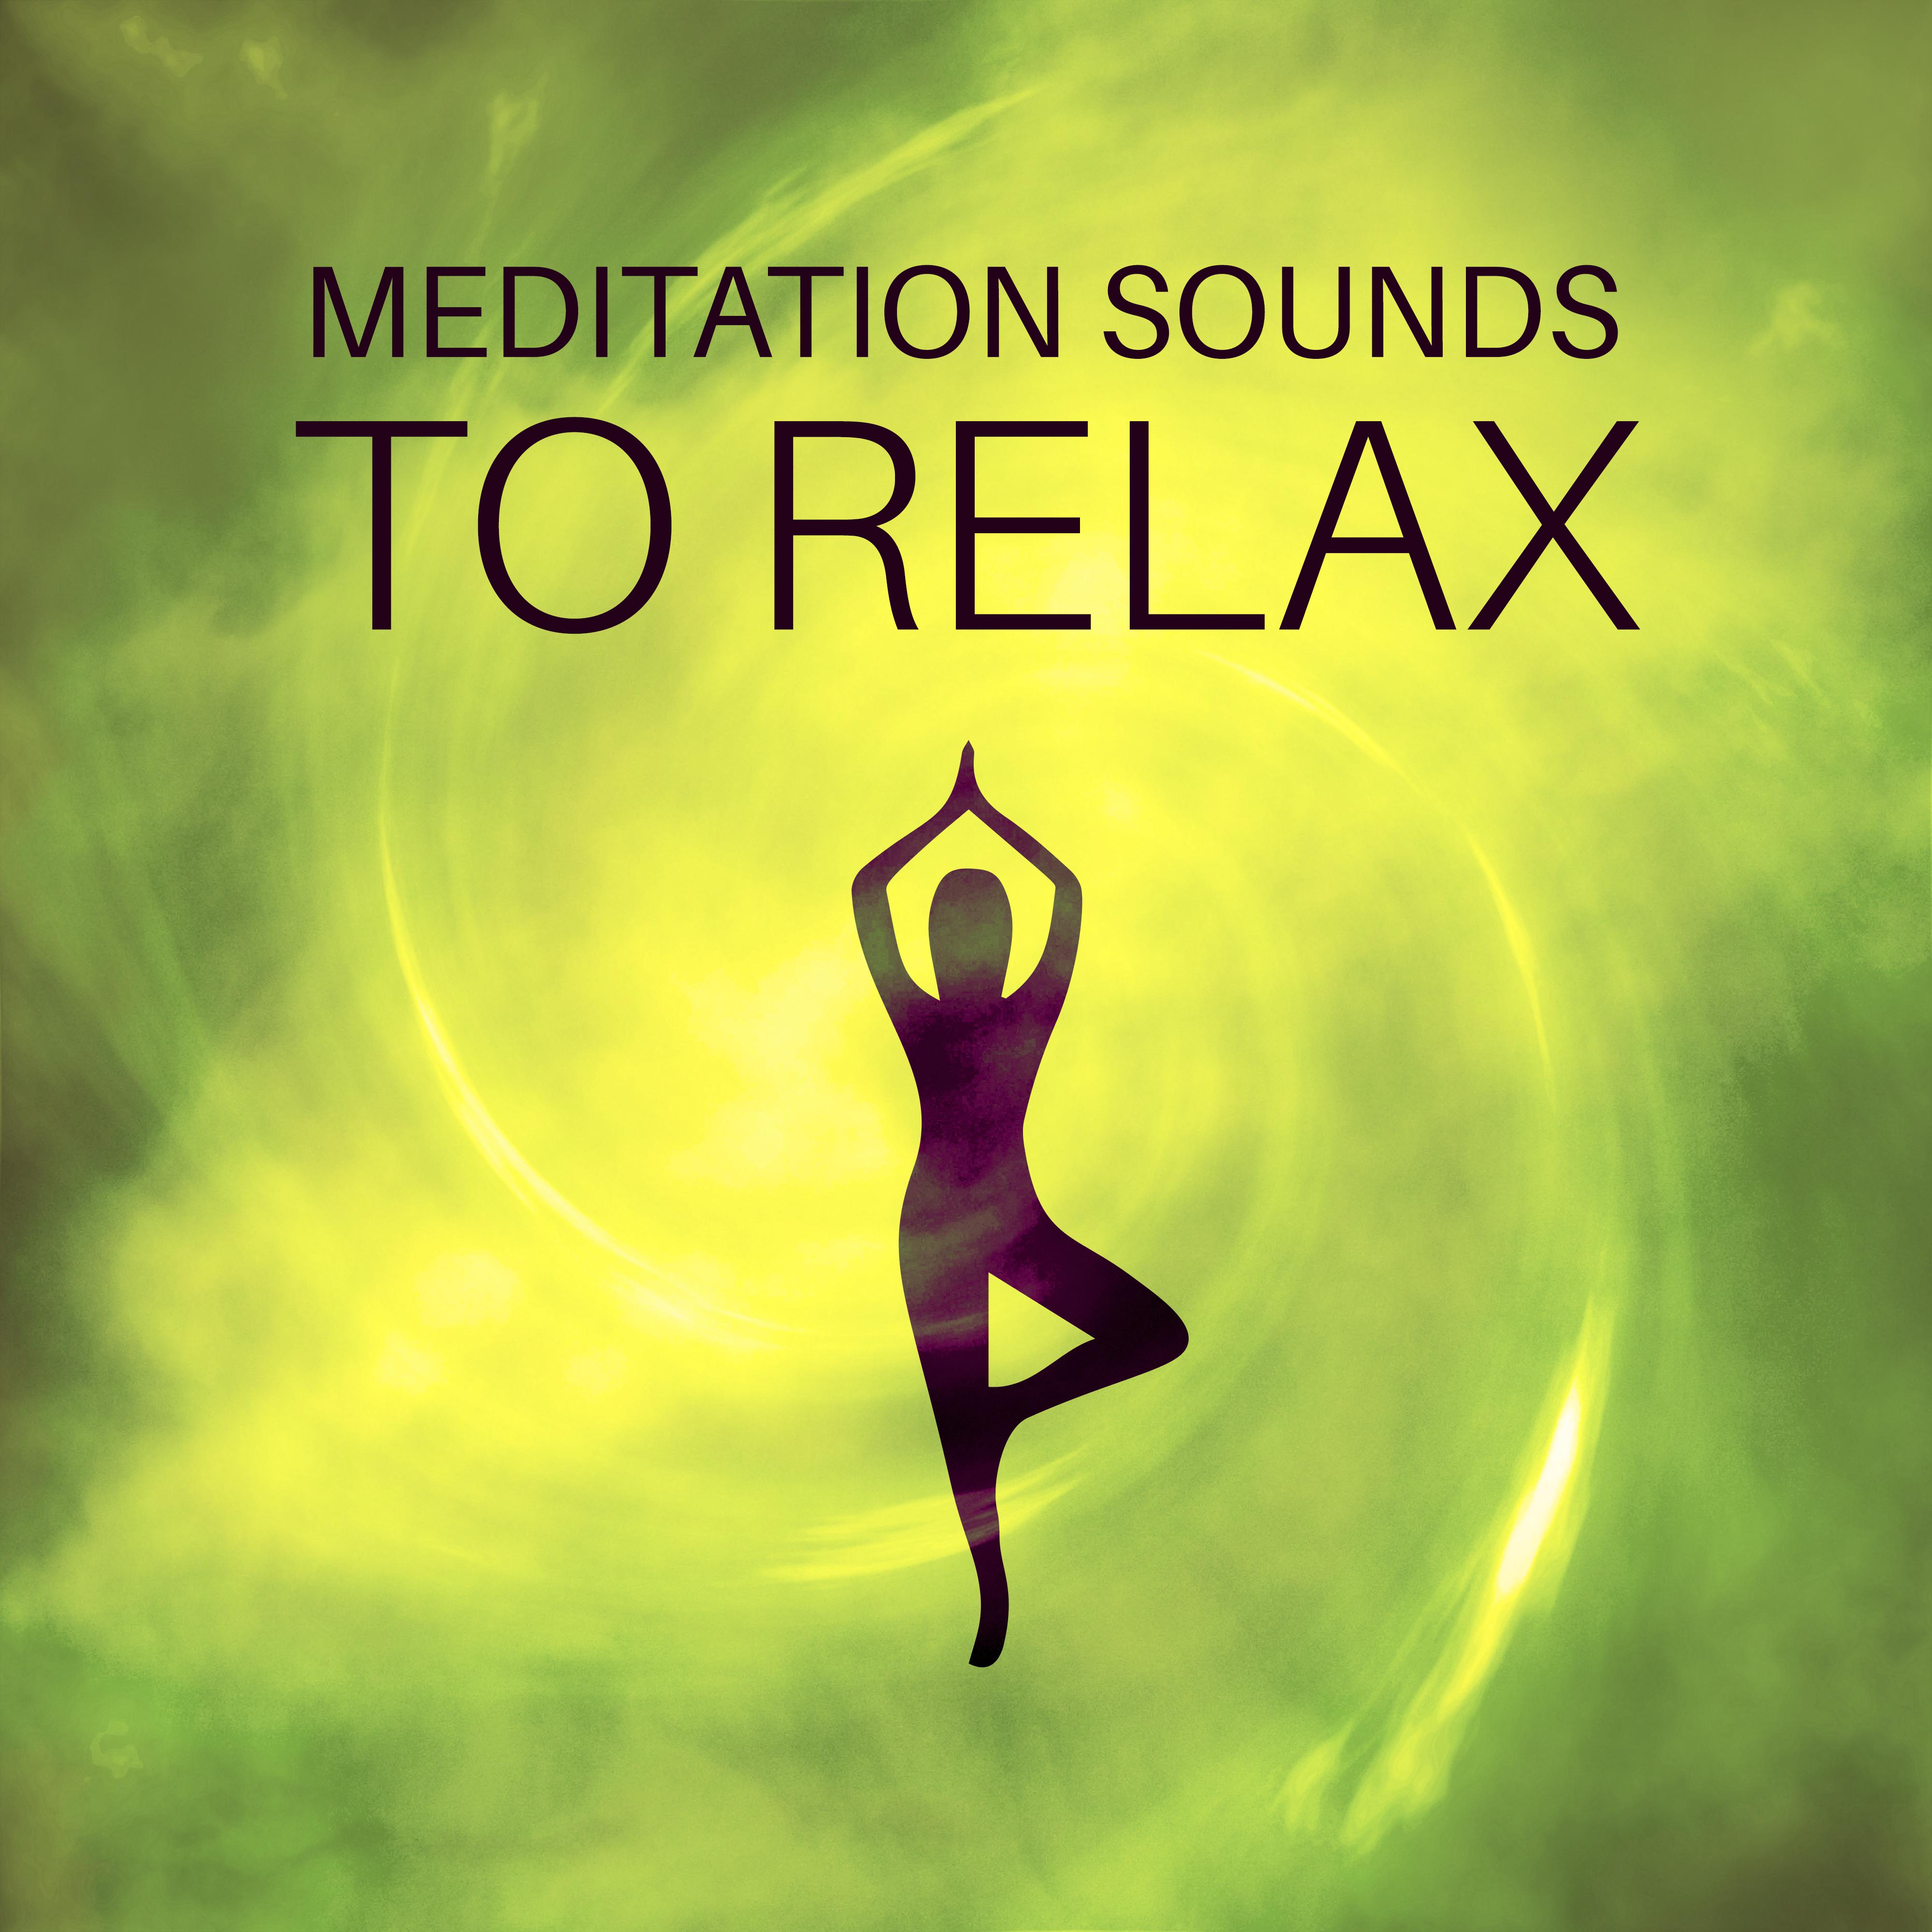 Meditation Sounds to Relax – Soothing New Age Songs, Meditation & Relaxation, Inner Journey, Stress Relief